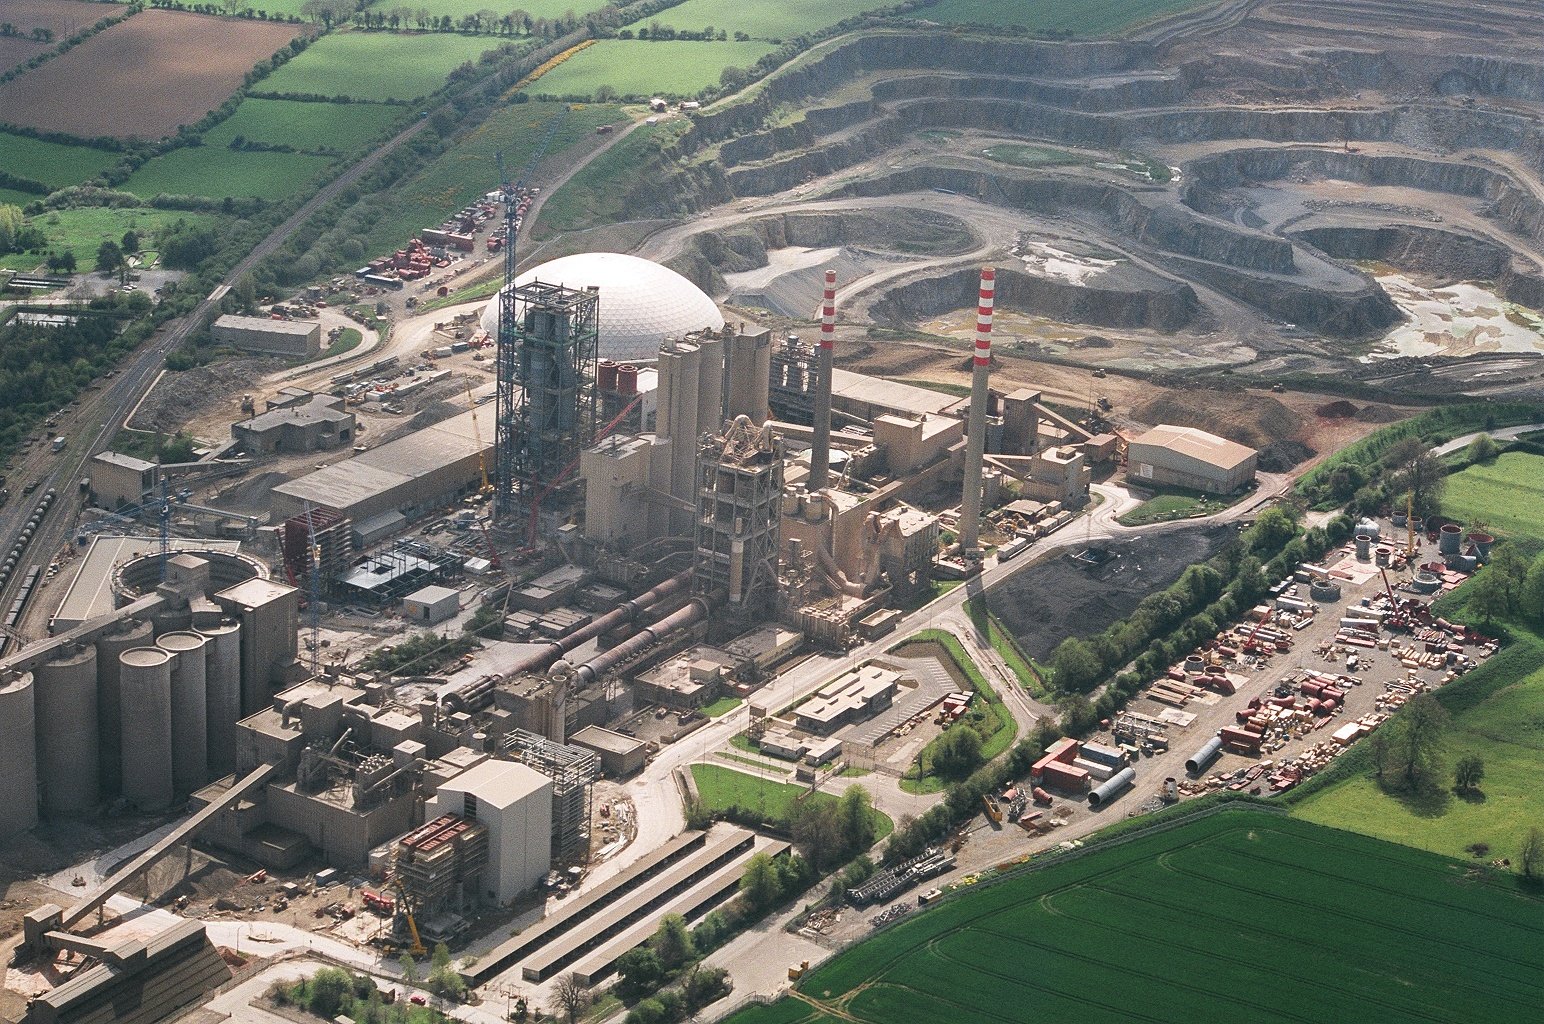 Aerial view of cement works